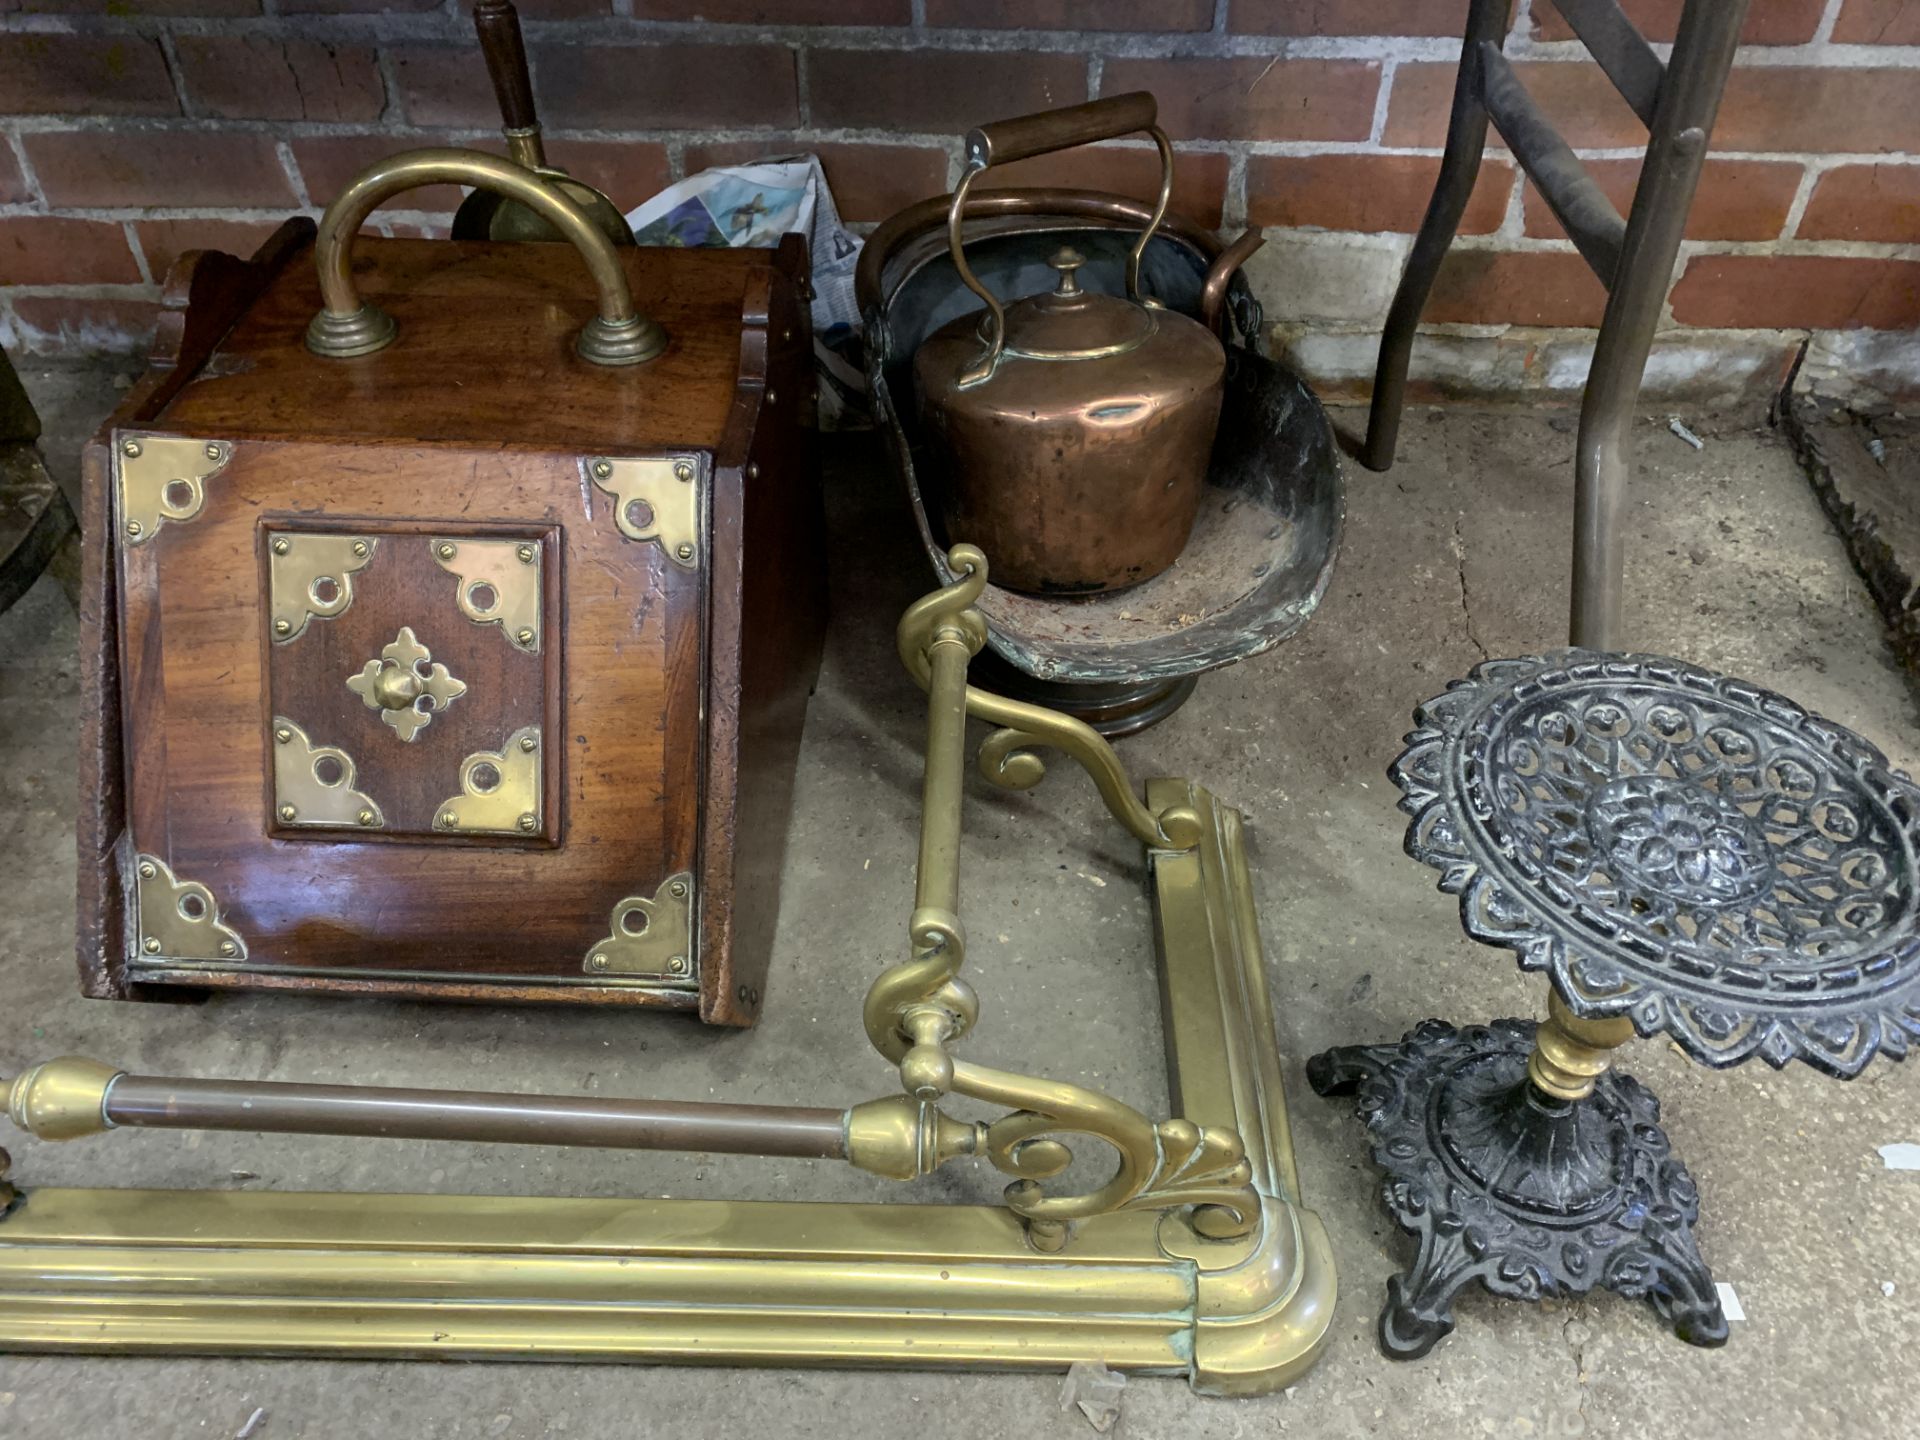 Mahogany and brass purdonium, together with other copper and brass fire items